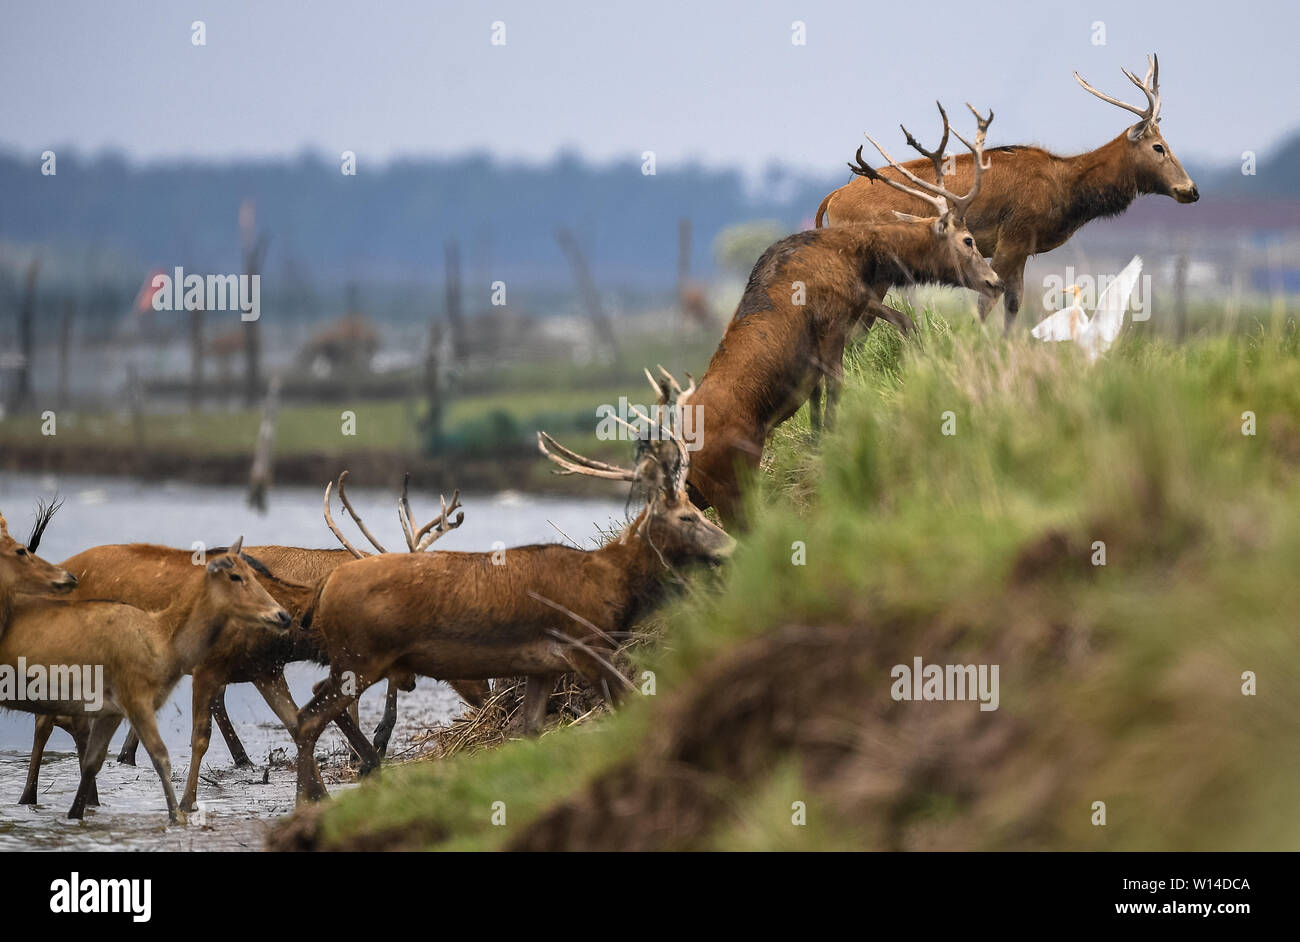 (190630) -- YANCHENG, June 30, 2019 (Xinhua) -- Milu deers, also known as Pere David's deers, cross a river in Dafeng Milu National Nature Reserve in east China's Jiangsu Province, June 27, 2019. Milu, a species endemic to China, was on the edge of extinction in the early 20th century due to overhunting and habitat loss.    The species, under A-level state protection in China, was named after Armand David, a French missionary and naturalist who first recorded the existence of the deer in China in 1865.     Since the British government gifted 39 milu deer to Dafeng Milu National Nature Reserve Stock Photo